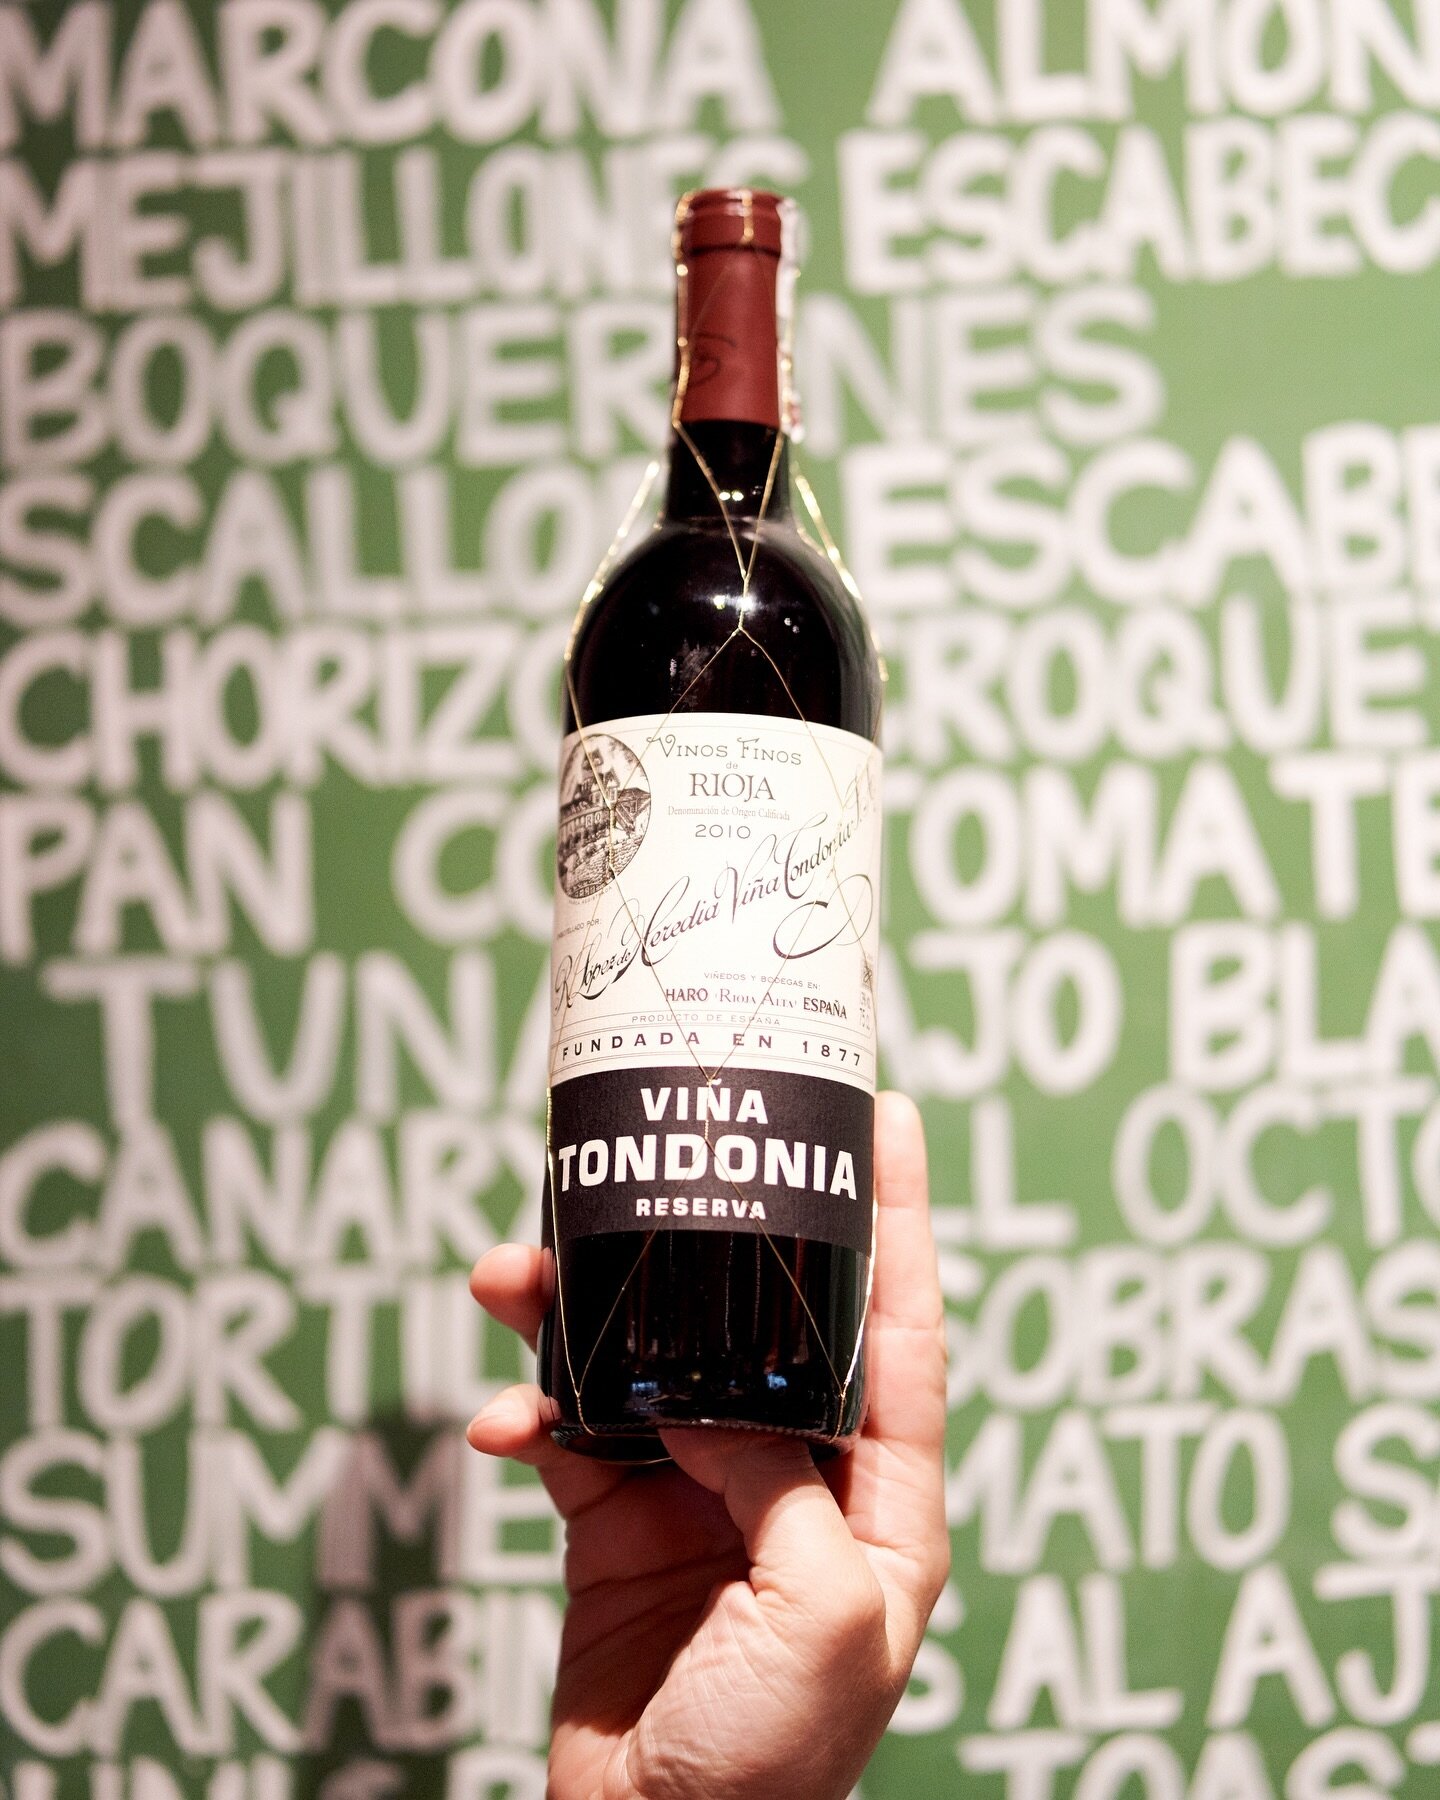 Indulge in our special wine offering, the Vi&ntilde;a Tondonia from Bodegas Lopez de Heredia in Rioja. This incredible wine is made using traditional biodynamic techniques and aged with indigenous yeasts, just like Rafael Lopez de Heredia did 150 yea